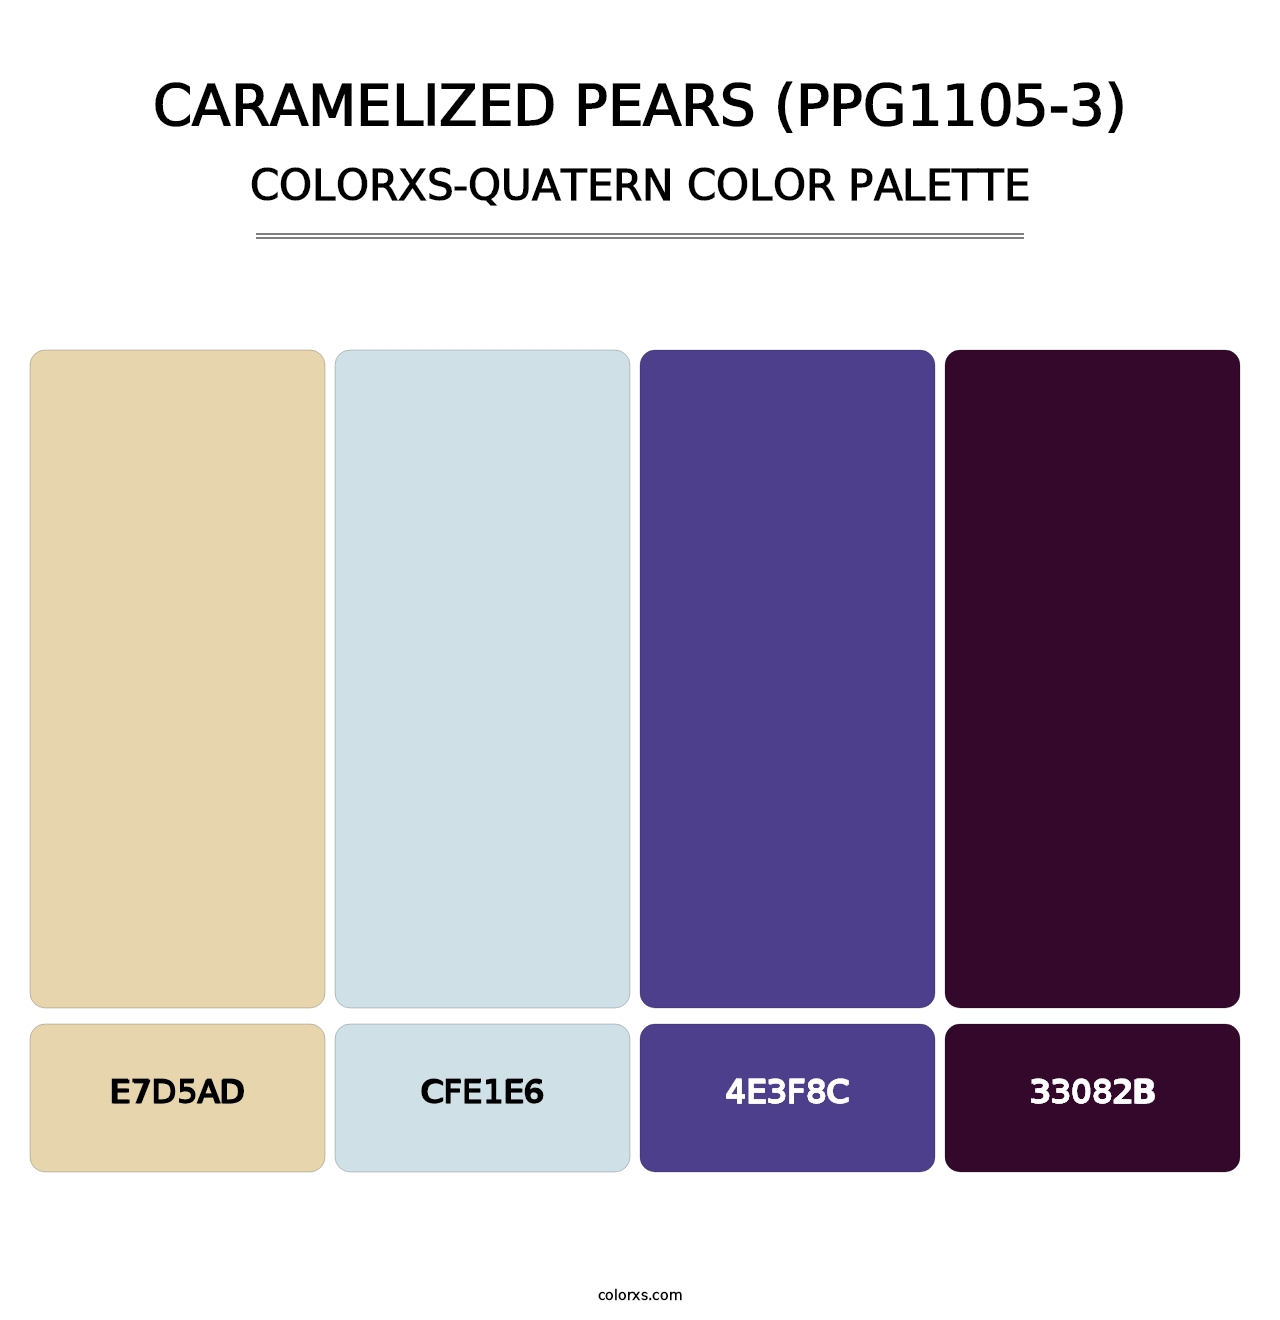 Caramelized Pears (PPG1105-3) - Colorxs Quatern Palette